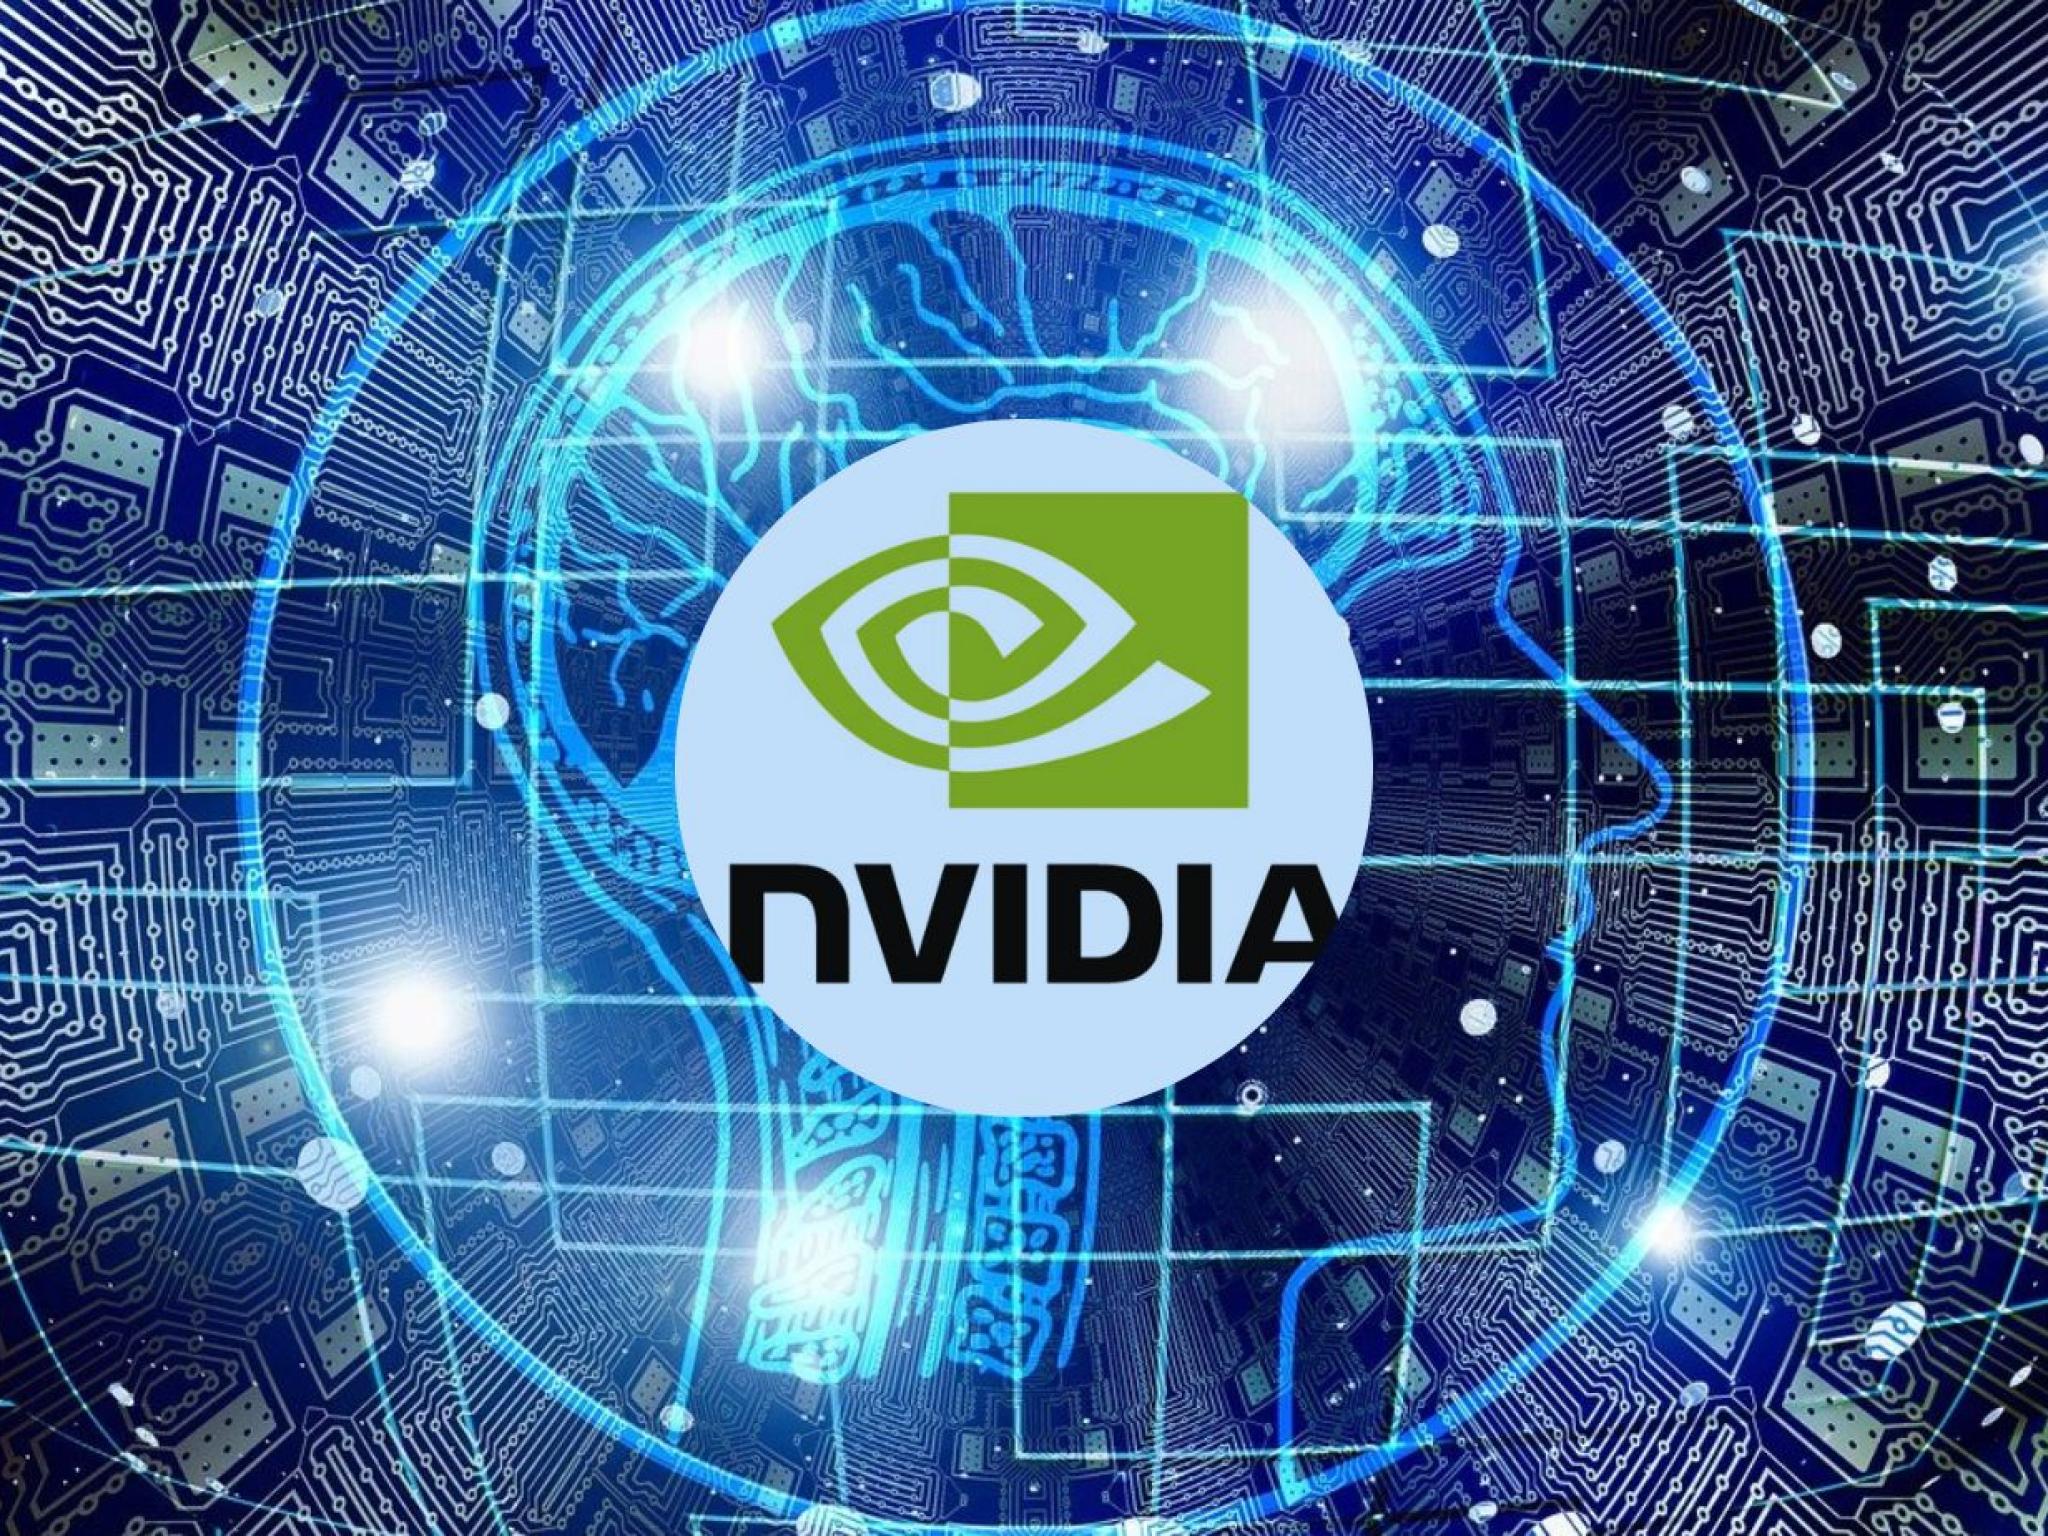  bullish-for-nvidia-amd-this-fund-offers-3x-leverage-and-it-may-be-about-to-dip 